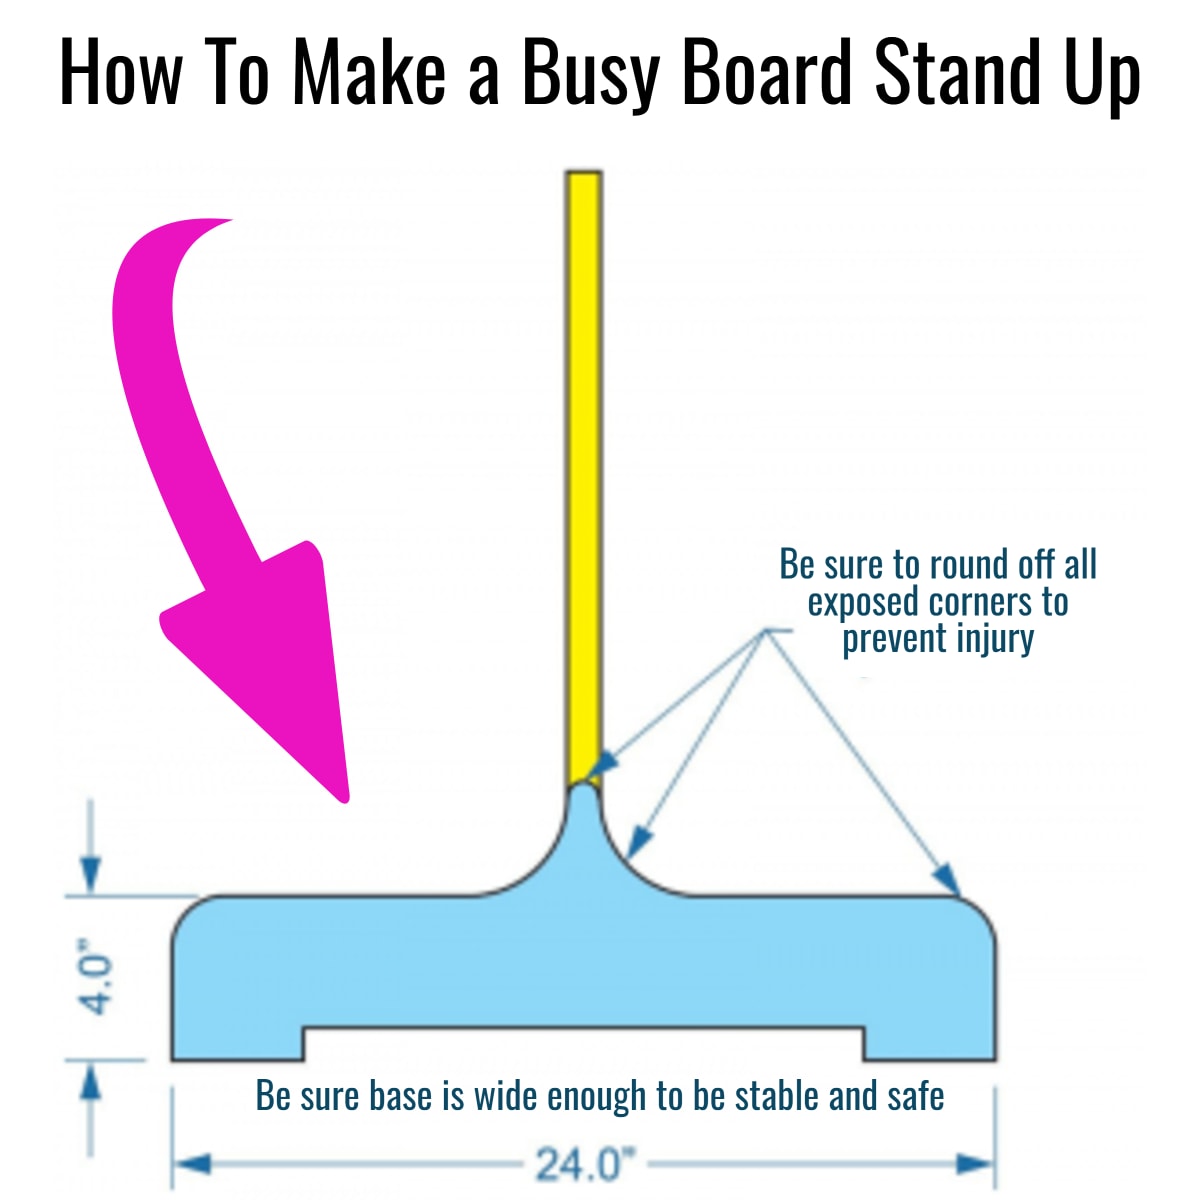 How to make a busy board stand up SAFELY for your toddler. Making a homemade busy board, sensory board or activity wall for your toddler? Here are 3 safe ways to make a busy board stand up with you're making a DIY busy board